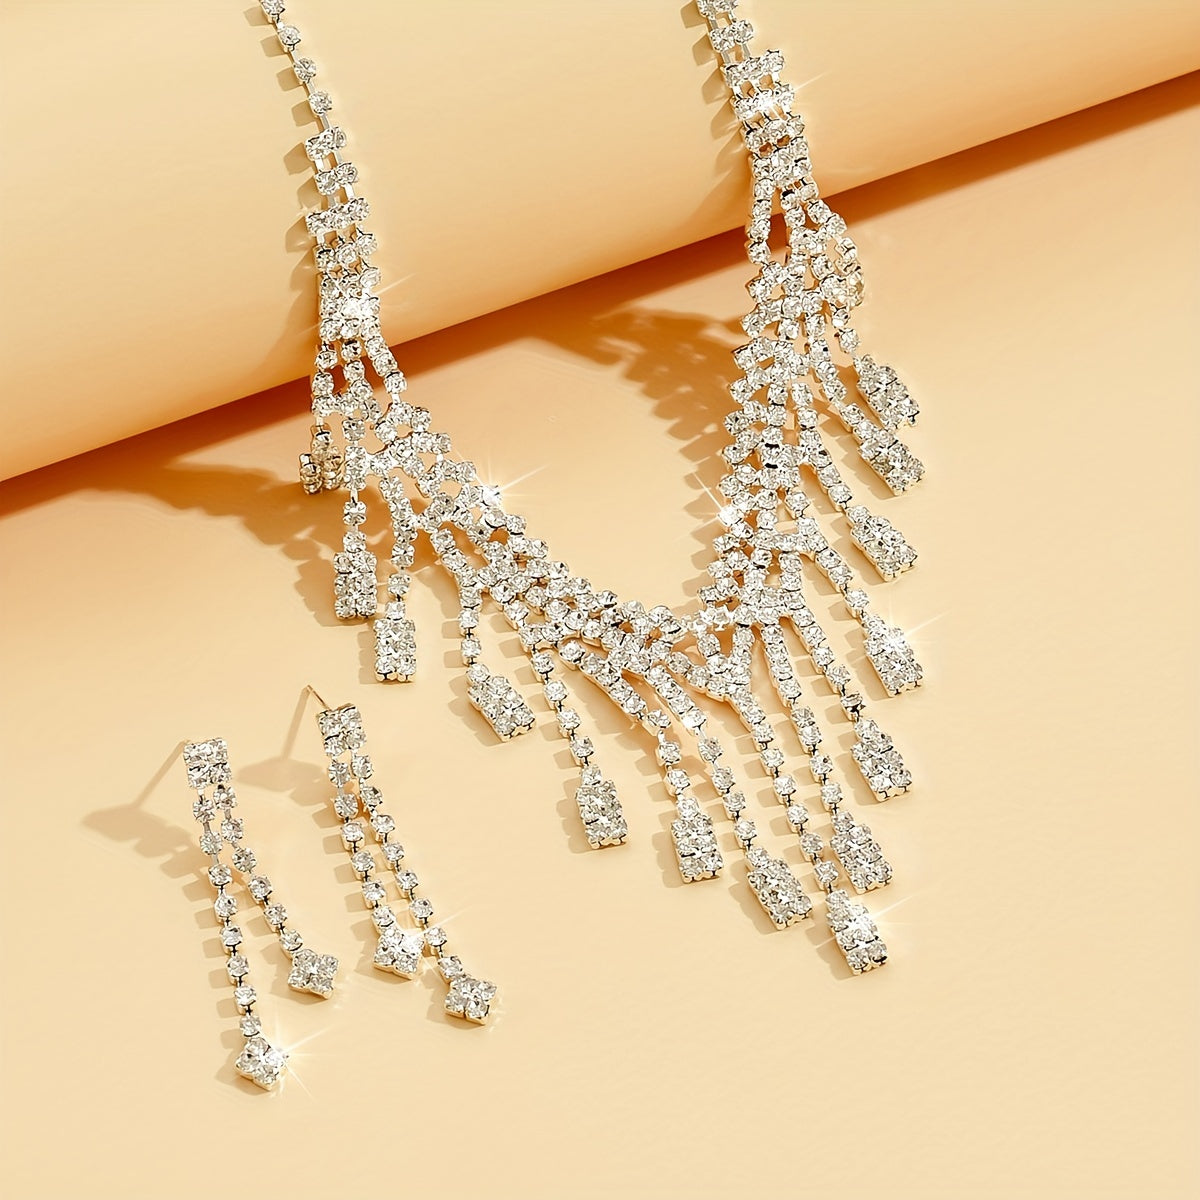 3pcs Elegant Silver Plated Jewelry Set with Rhinestone Inlay and Long Tassel Design for Evening and Cocktail Parties